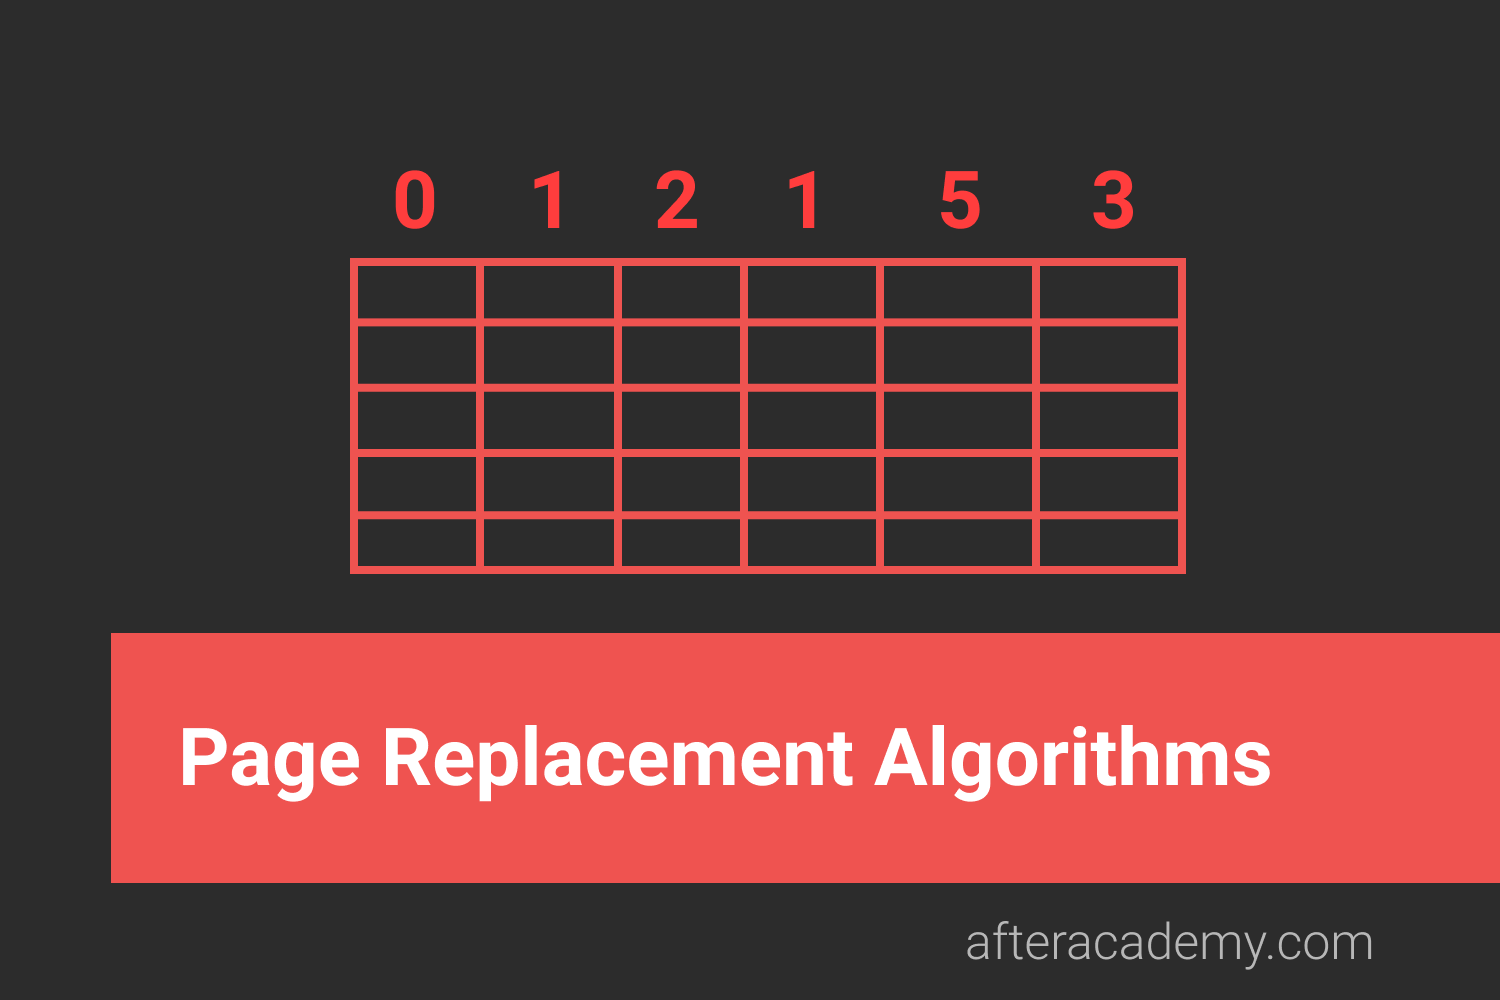 What are the Page Replacement Algorithms?